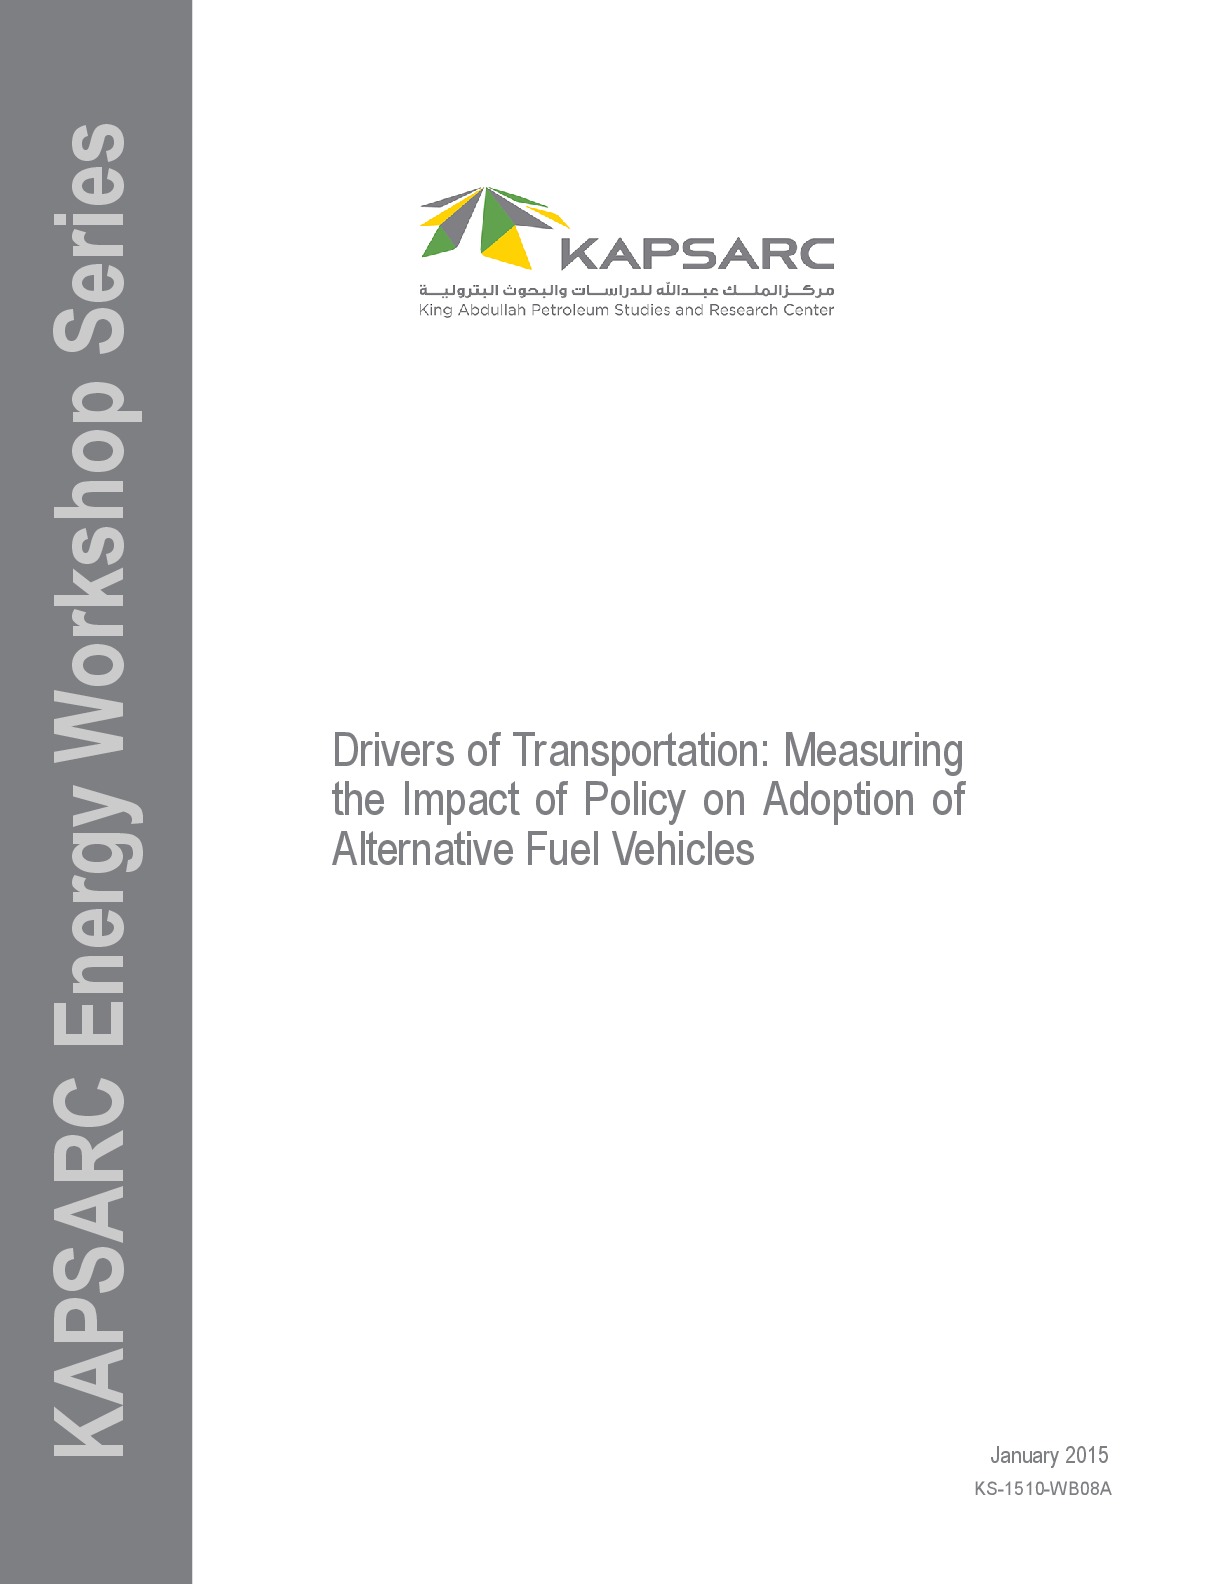 Drivers of Transportation: Measuring the Impact of Policy on Adoption of Alternative Fuel Vehicles